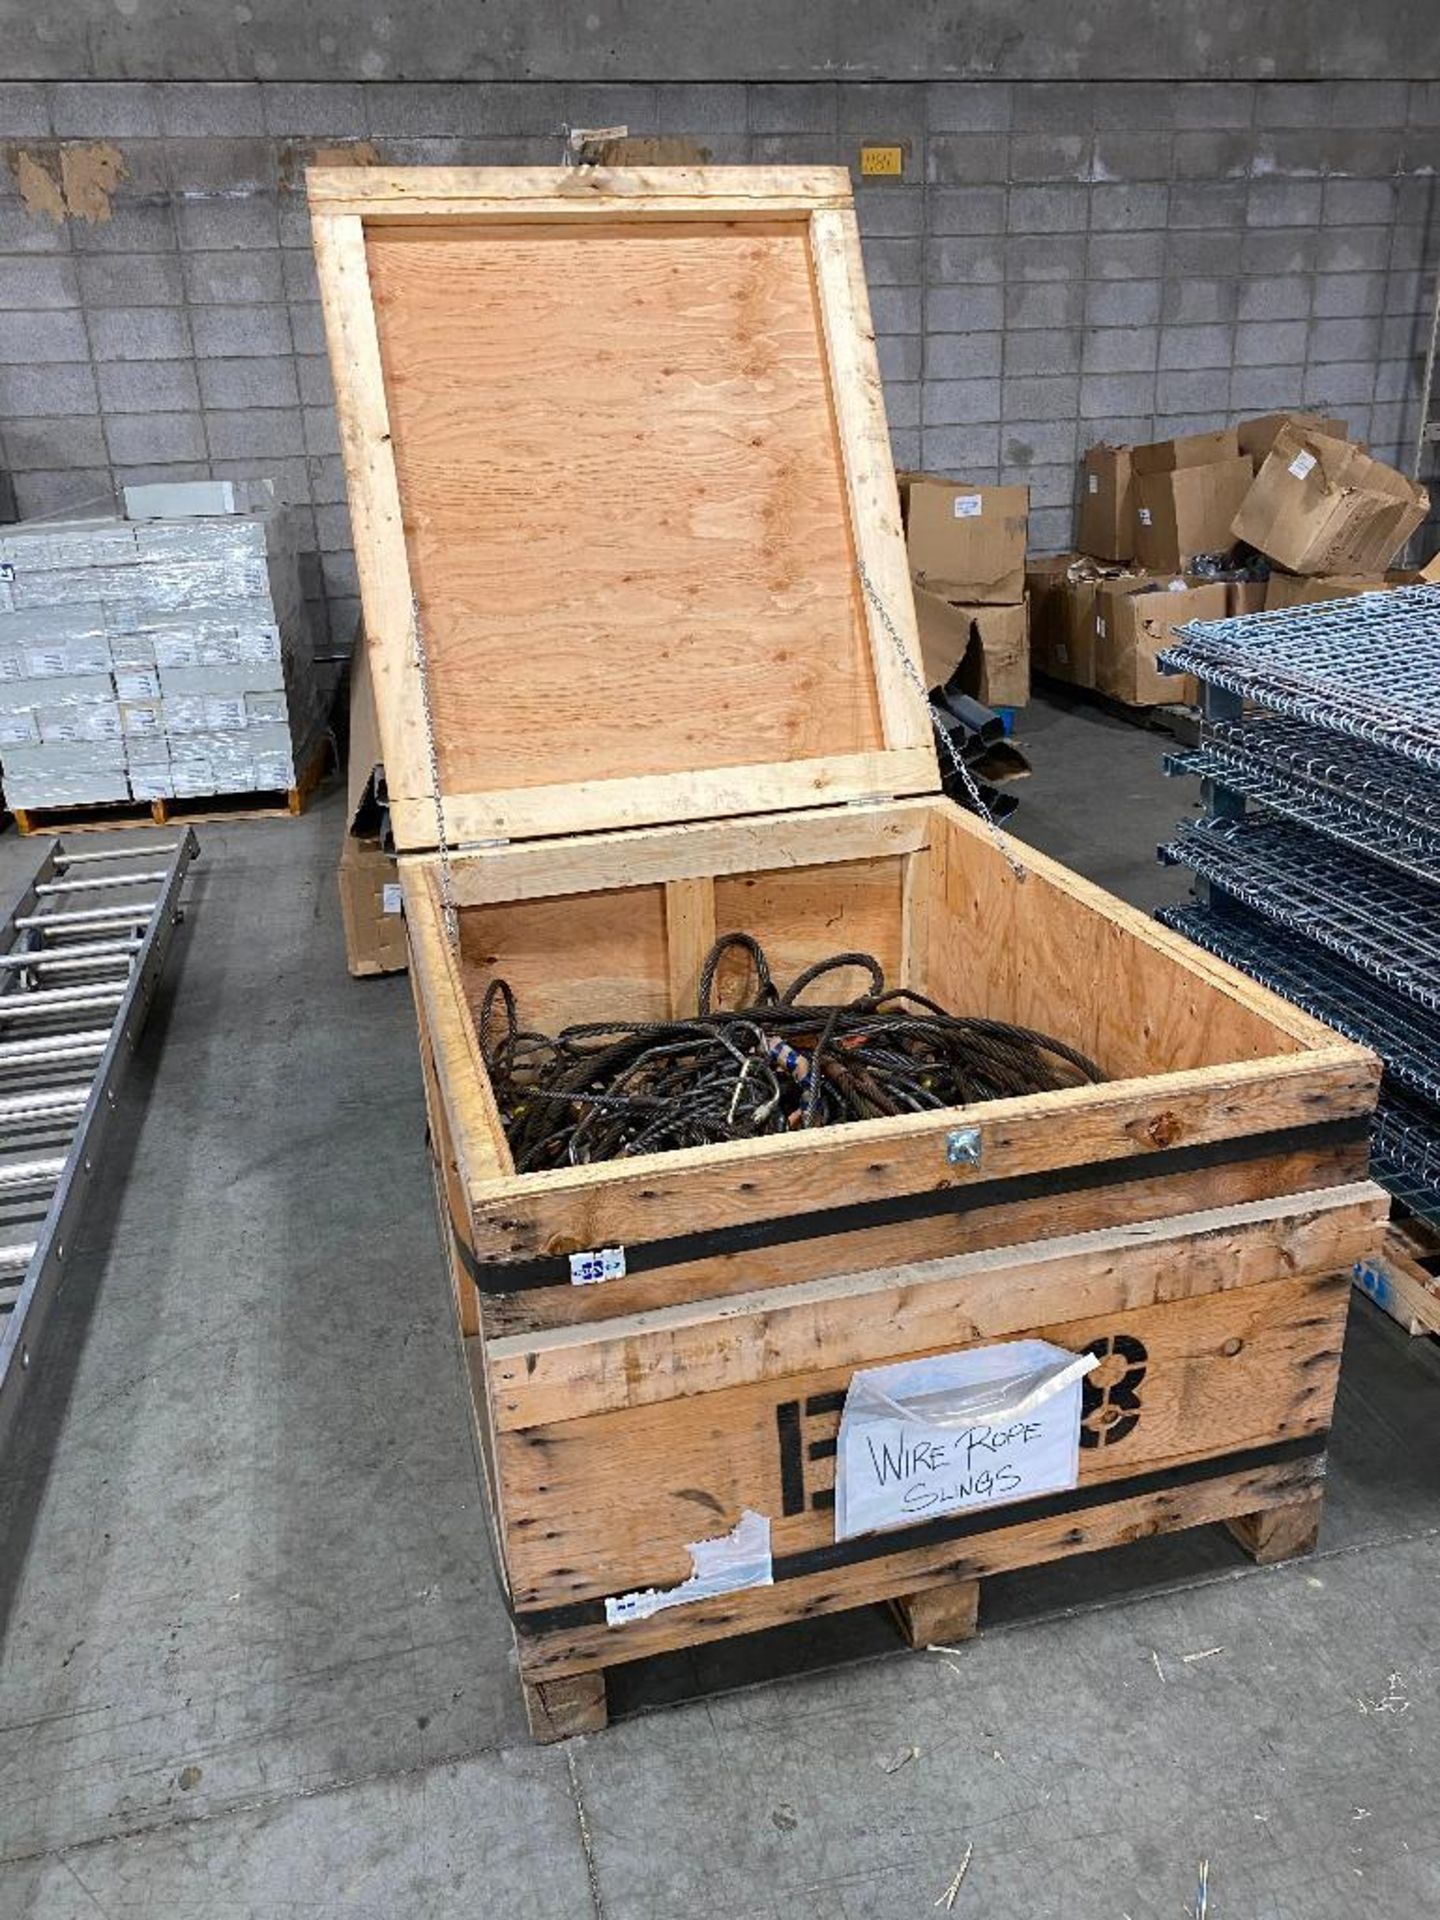 Crate of Asst. Wire Rope Slings